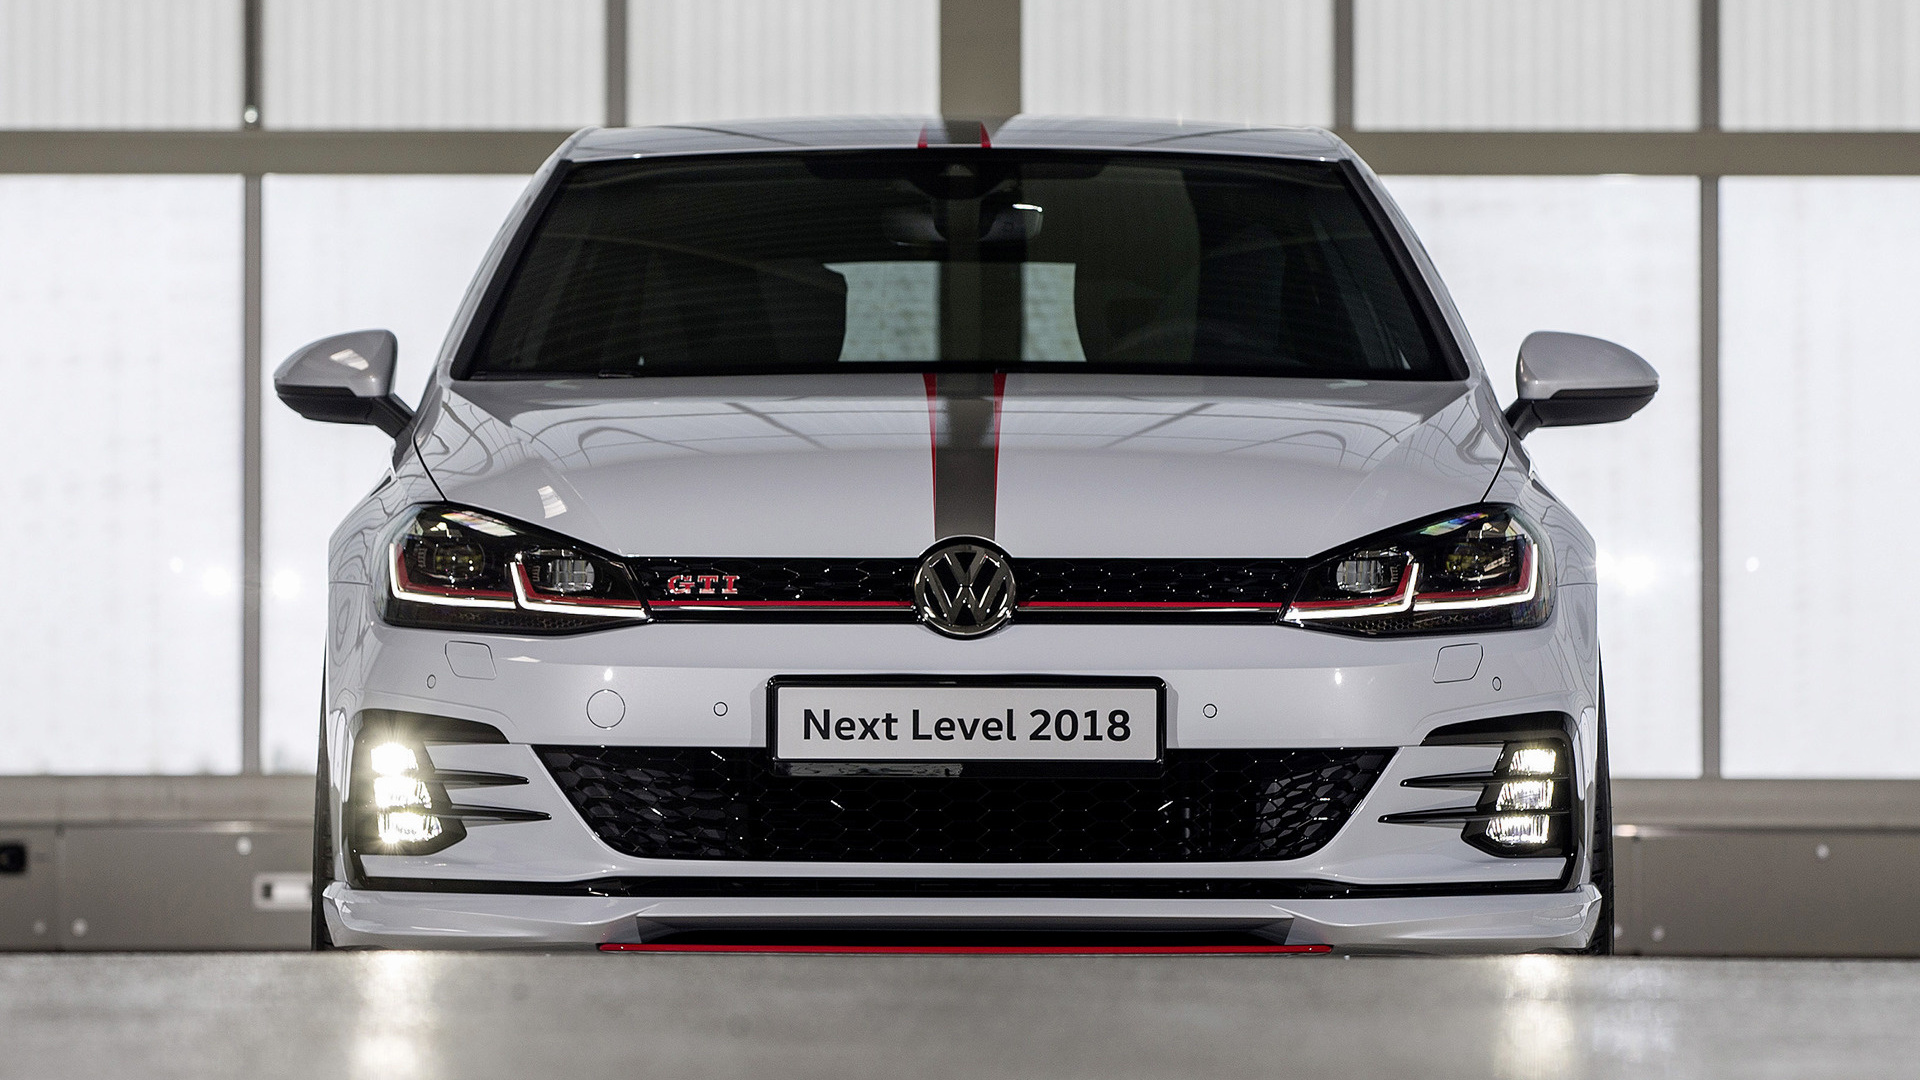 2018 Volkswagen Golf GTI Next Level Concept - Wallpapers and HD Images ...